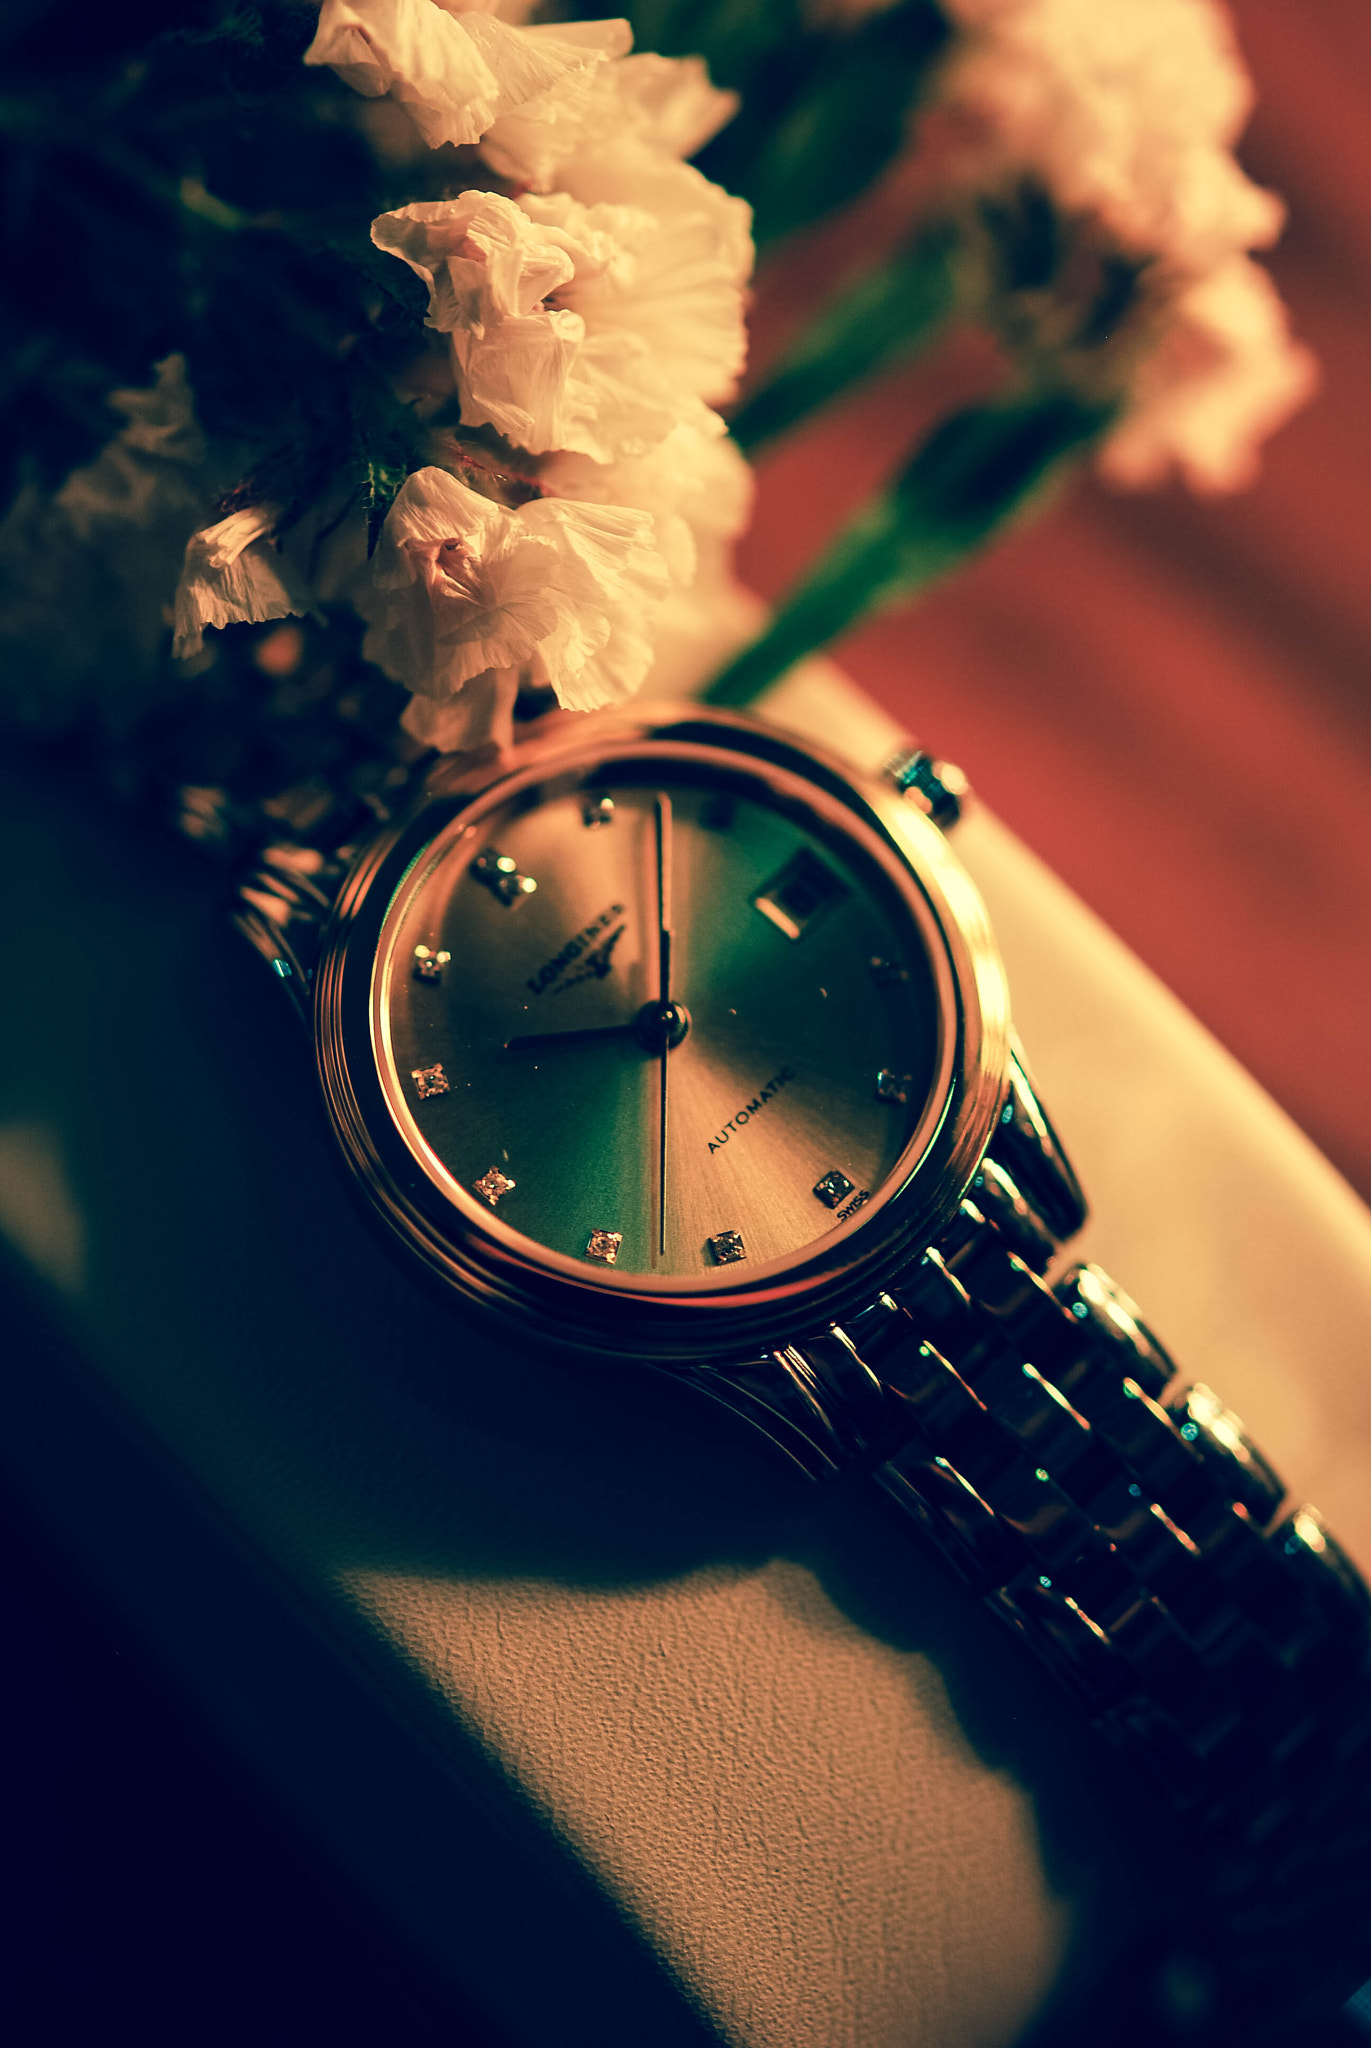 Nikon D60 + Nikon AF-S Micro-Nikkor 60mm F2.8G ED sample photo. The watch photography